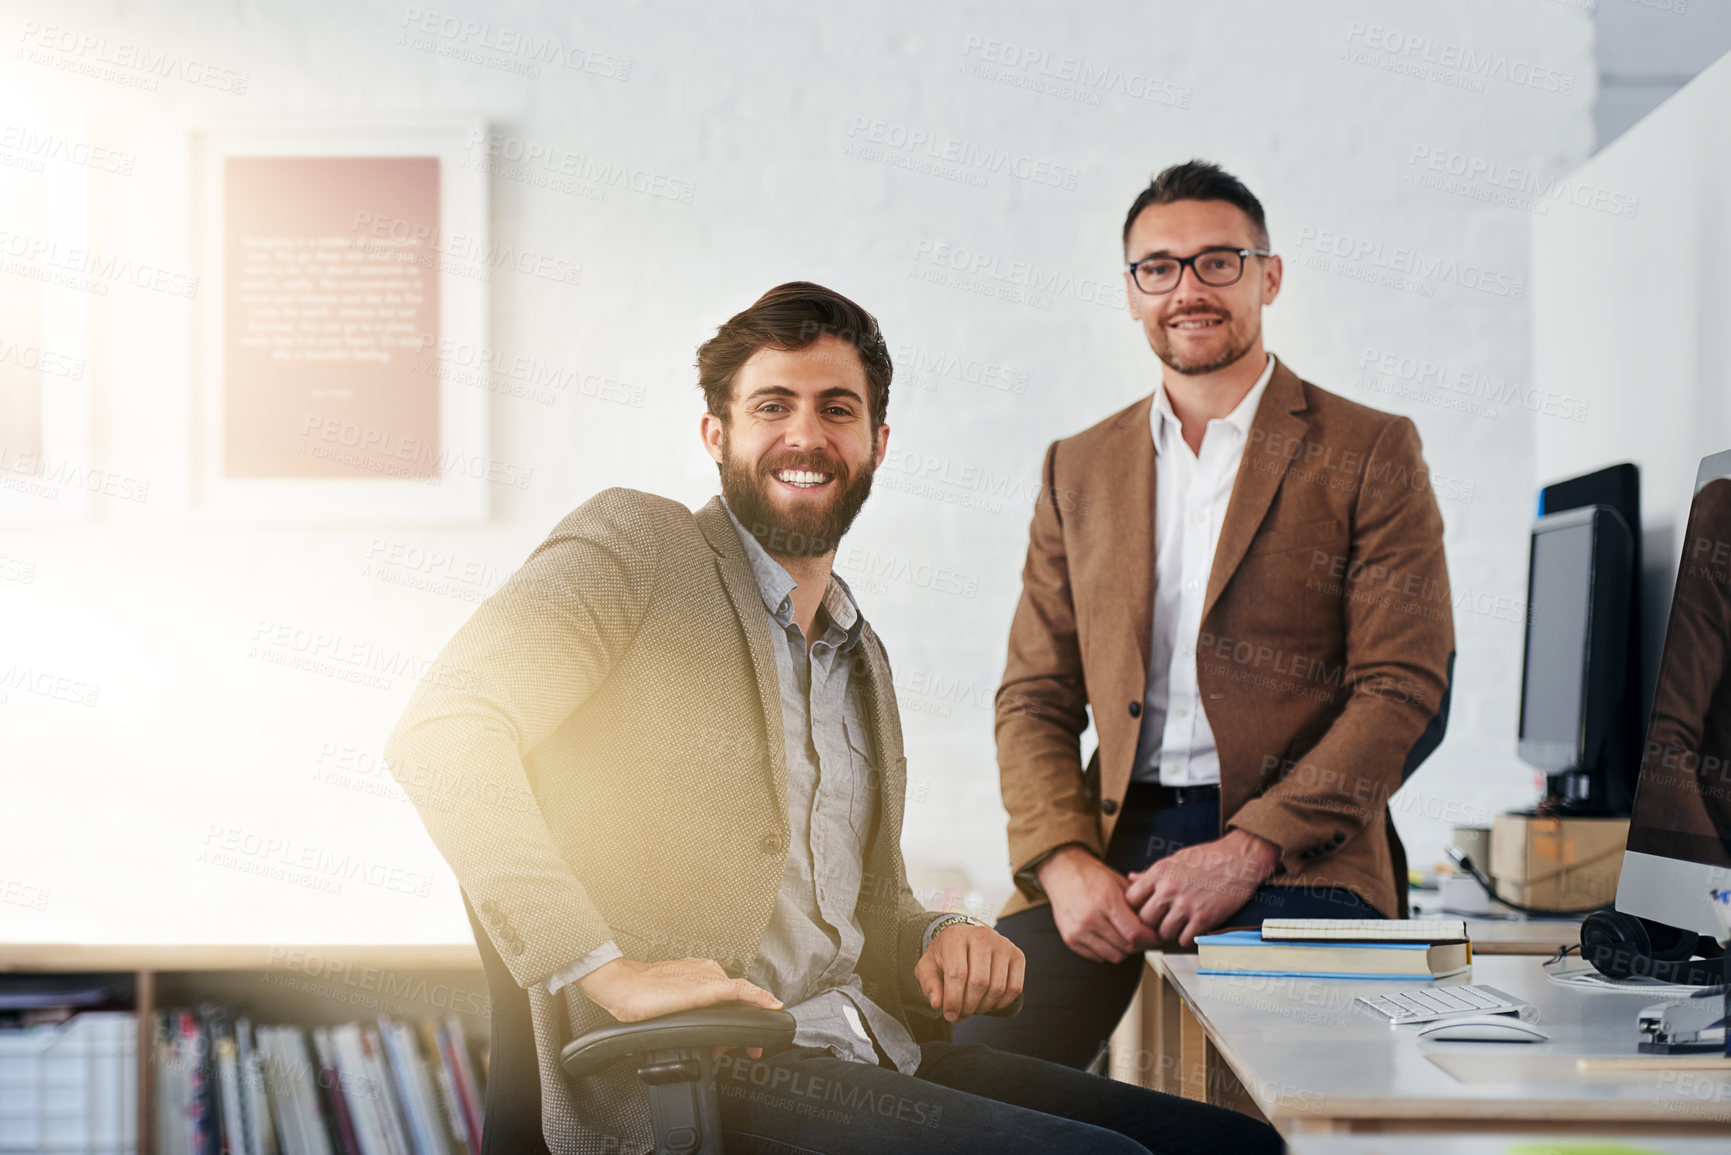 Buy stock photo Cropped shot of two designers in an office